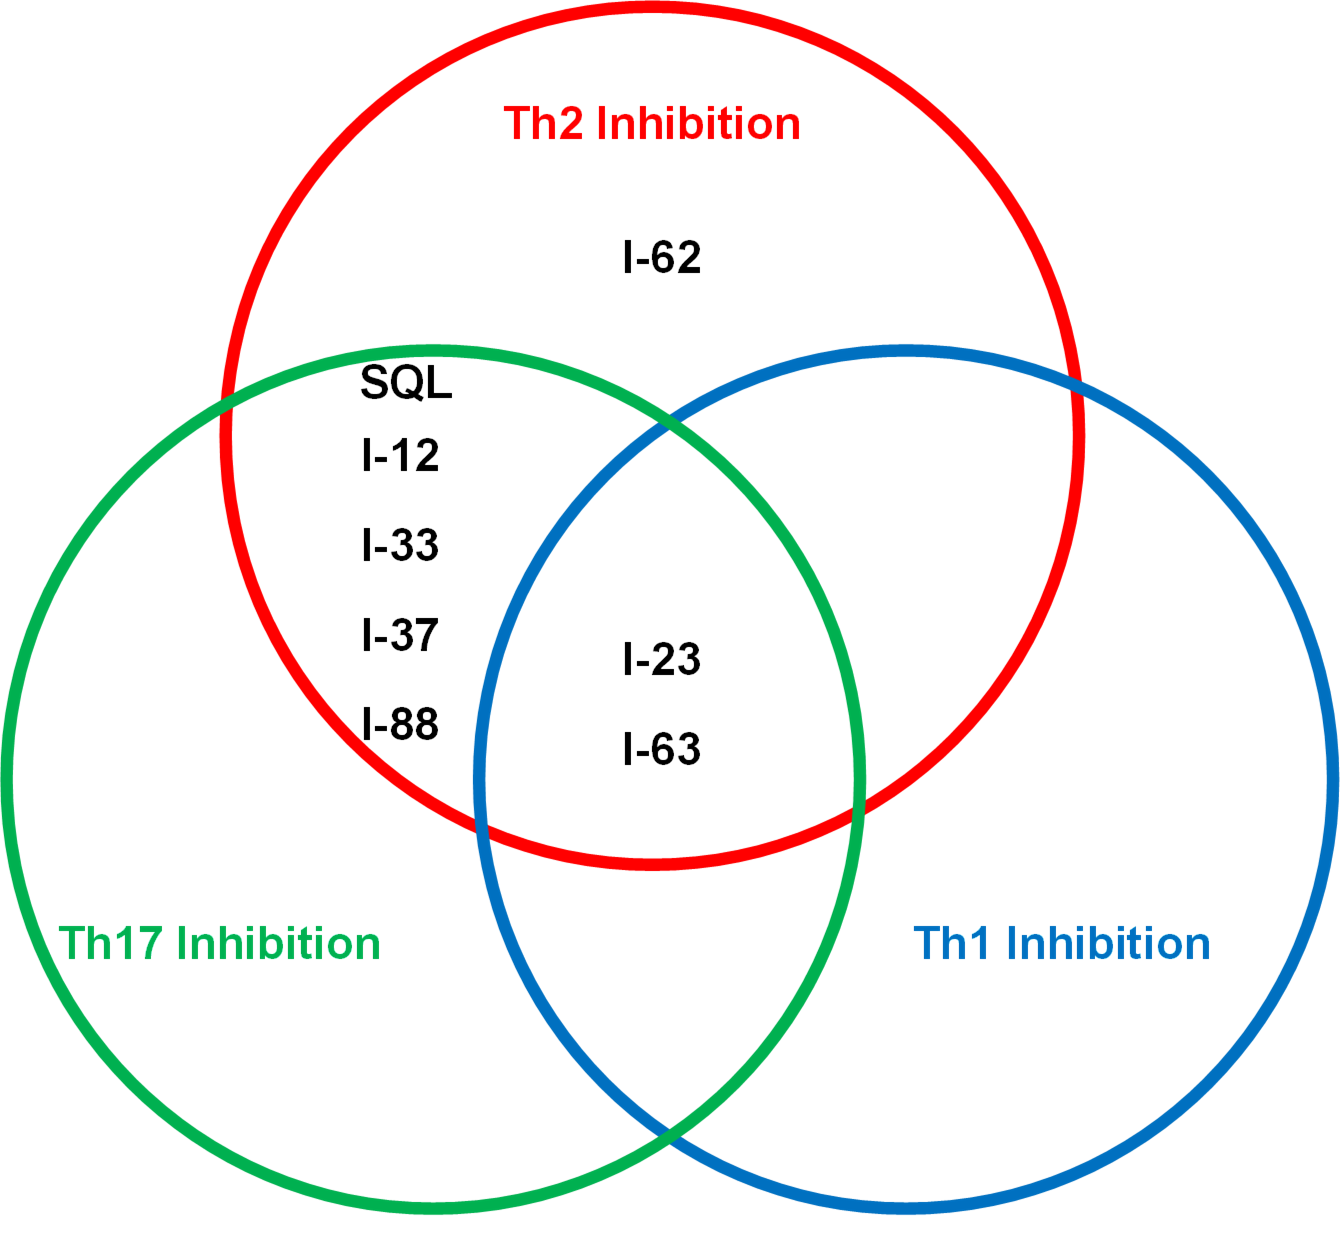 Figure 1: Venn diagram illustrating different biological properties of the next-gen ITK inhibitors in T cell differentiation assays.